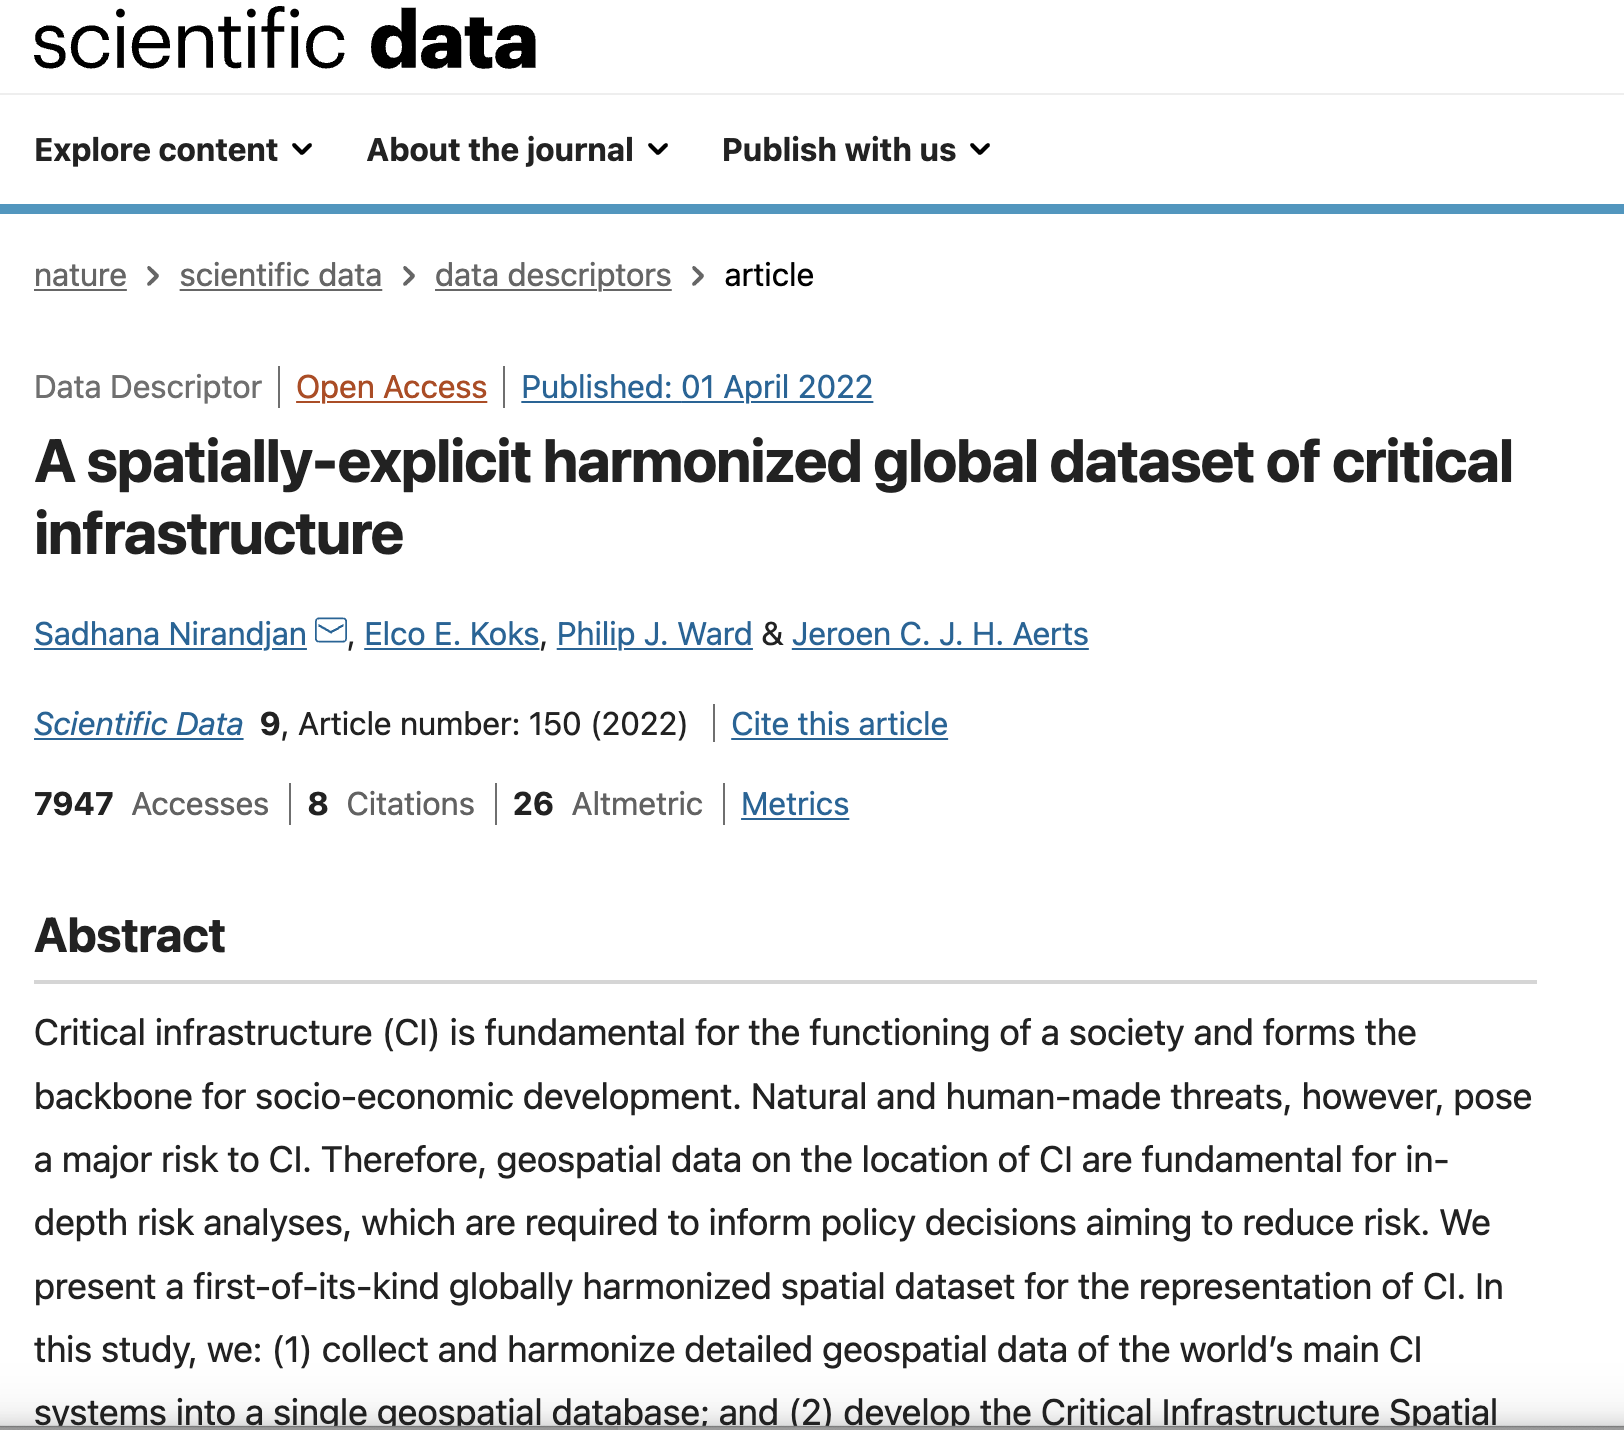 WP7 Sea level rise, infrastructure and coastal flooding- A spatially-explicit harmonized global dataset of critical infrastructure